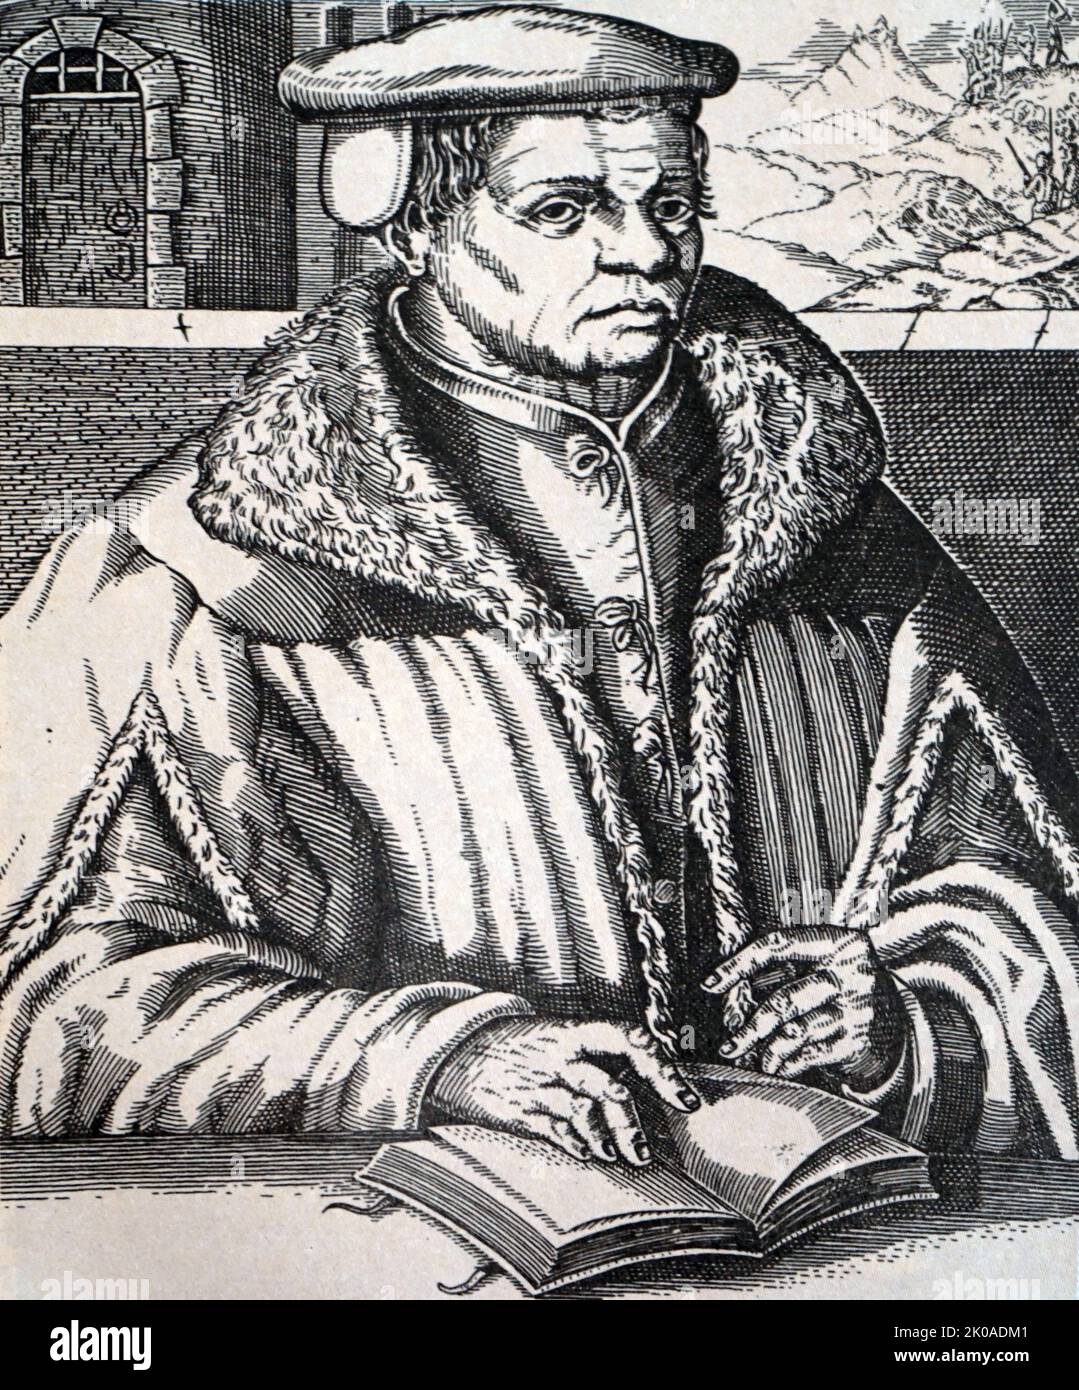 Thomas Muntzer (c.1489 - 1525) German preacher and theologian of the early Reformation whose opposition to both Martin Luther and the Roman Catholic Church led to his open defiance of late-feudal authority in central Germany. He became a leader of the German peasant and plebeian uprising of 1525 commonly known as the German Peasants' War. He was captured after the Battle of Frankenhausen, tortured and executed Stock Photo